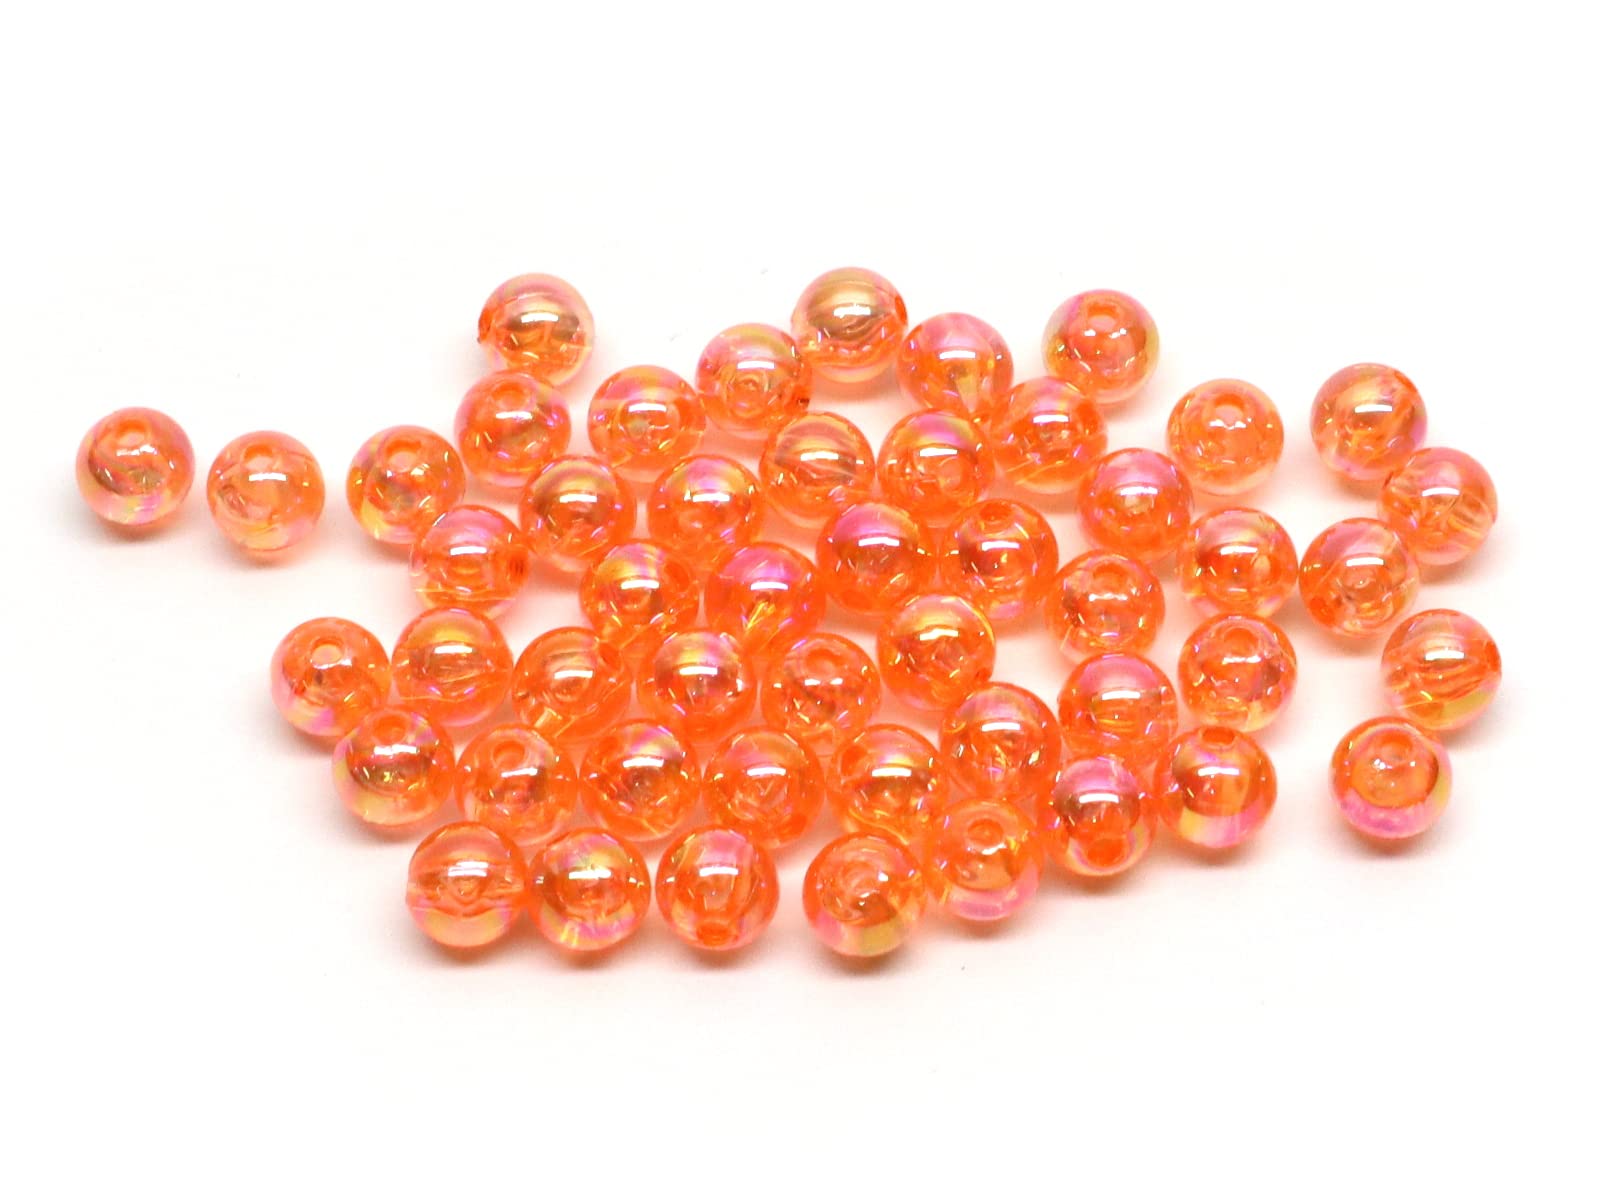 Harmony Fishing - Holographic Beads for Fishing Rigs, Baits & Lures (50  Pack) Orange, 6mm (50 Pack)